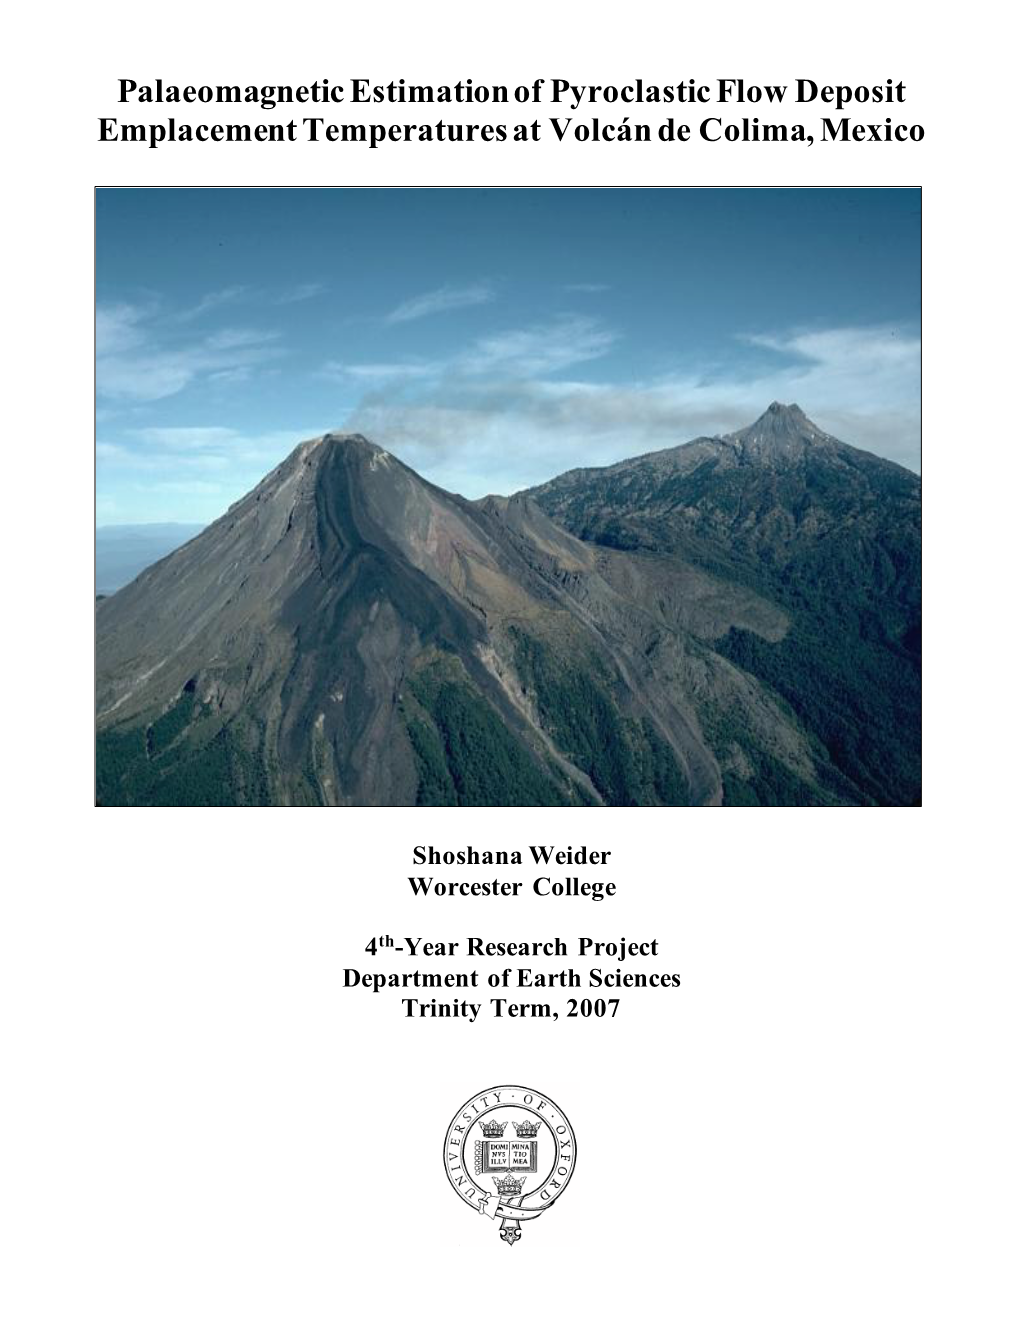 Palaeomagnetic Estimation of Pyroclastic Flow Deposit Emplacement Temperatures at Volcán De Colima, Mexico